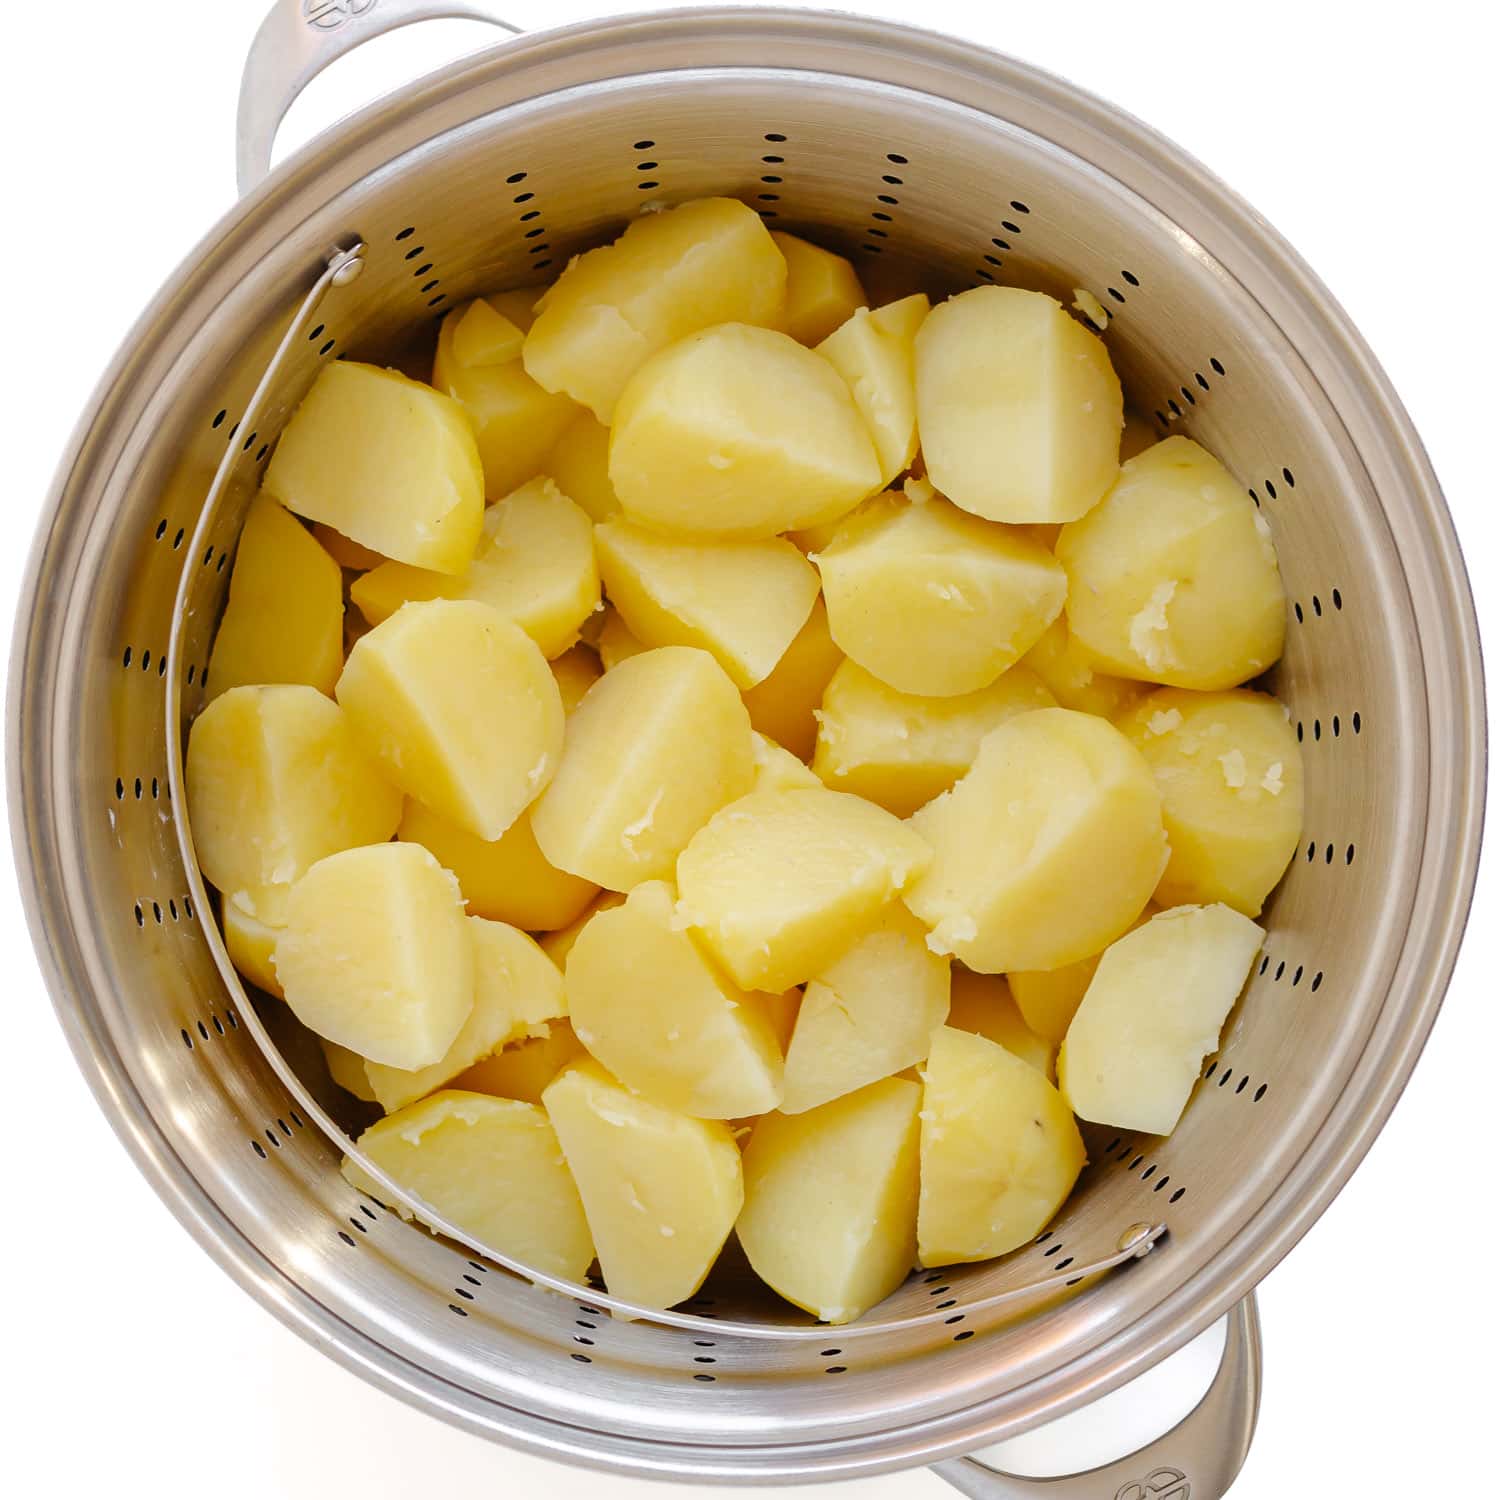 Peeled and cut up steamed potatoes in a steamer basket insert in stockpot.